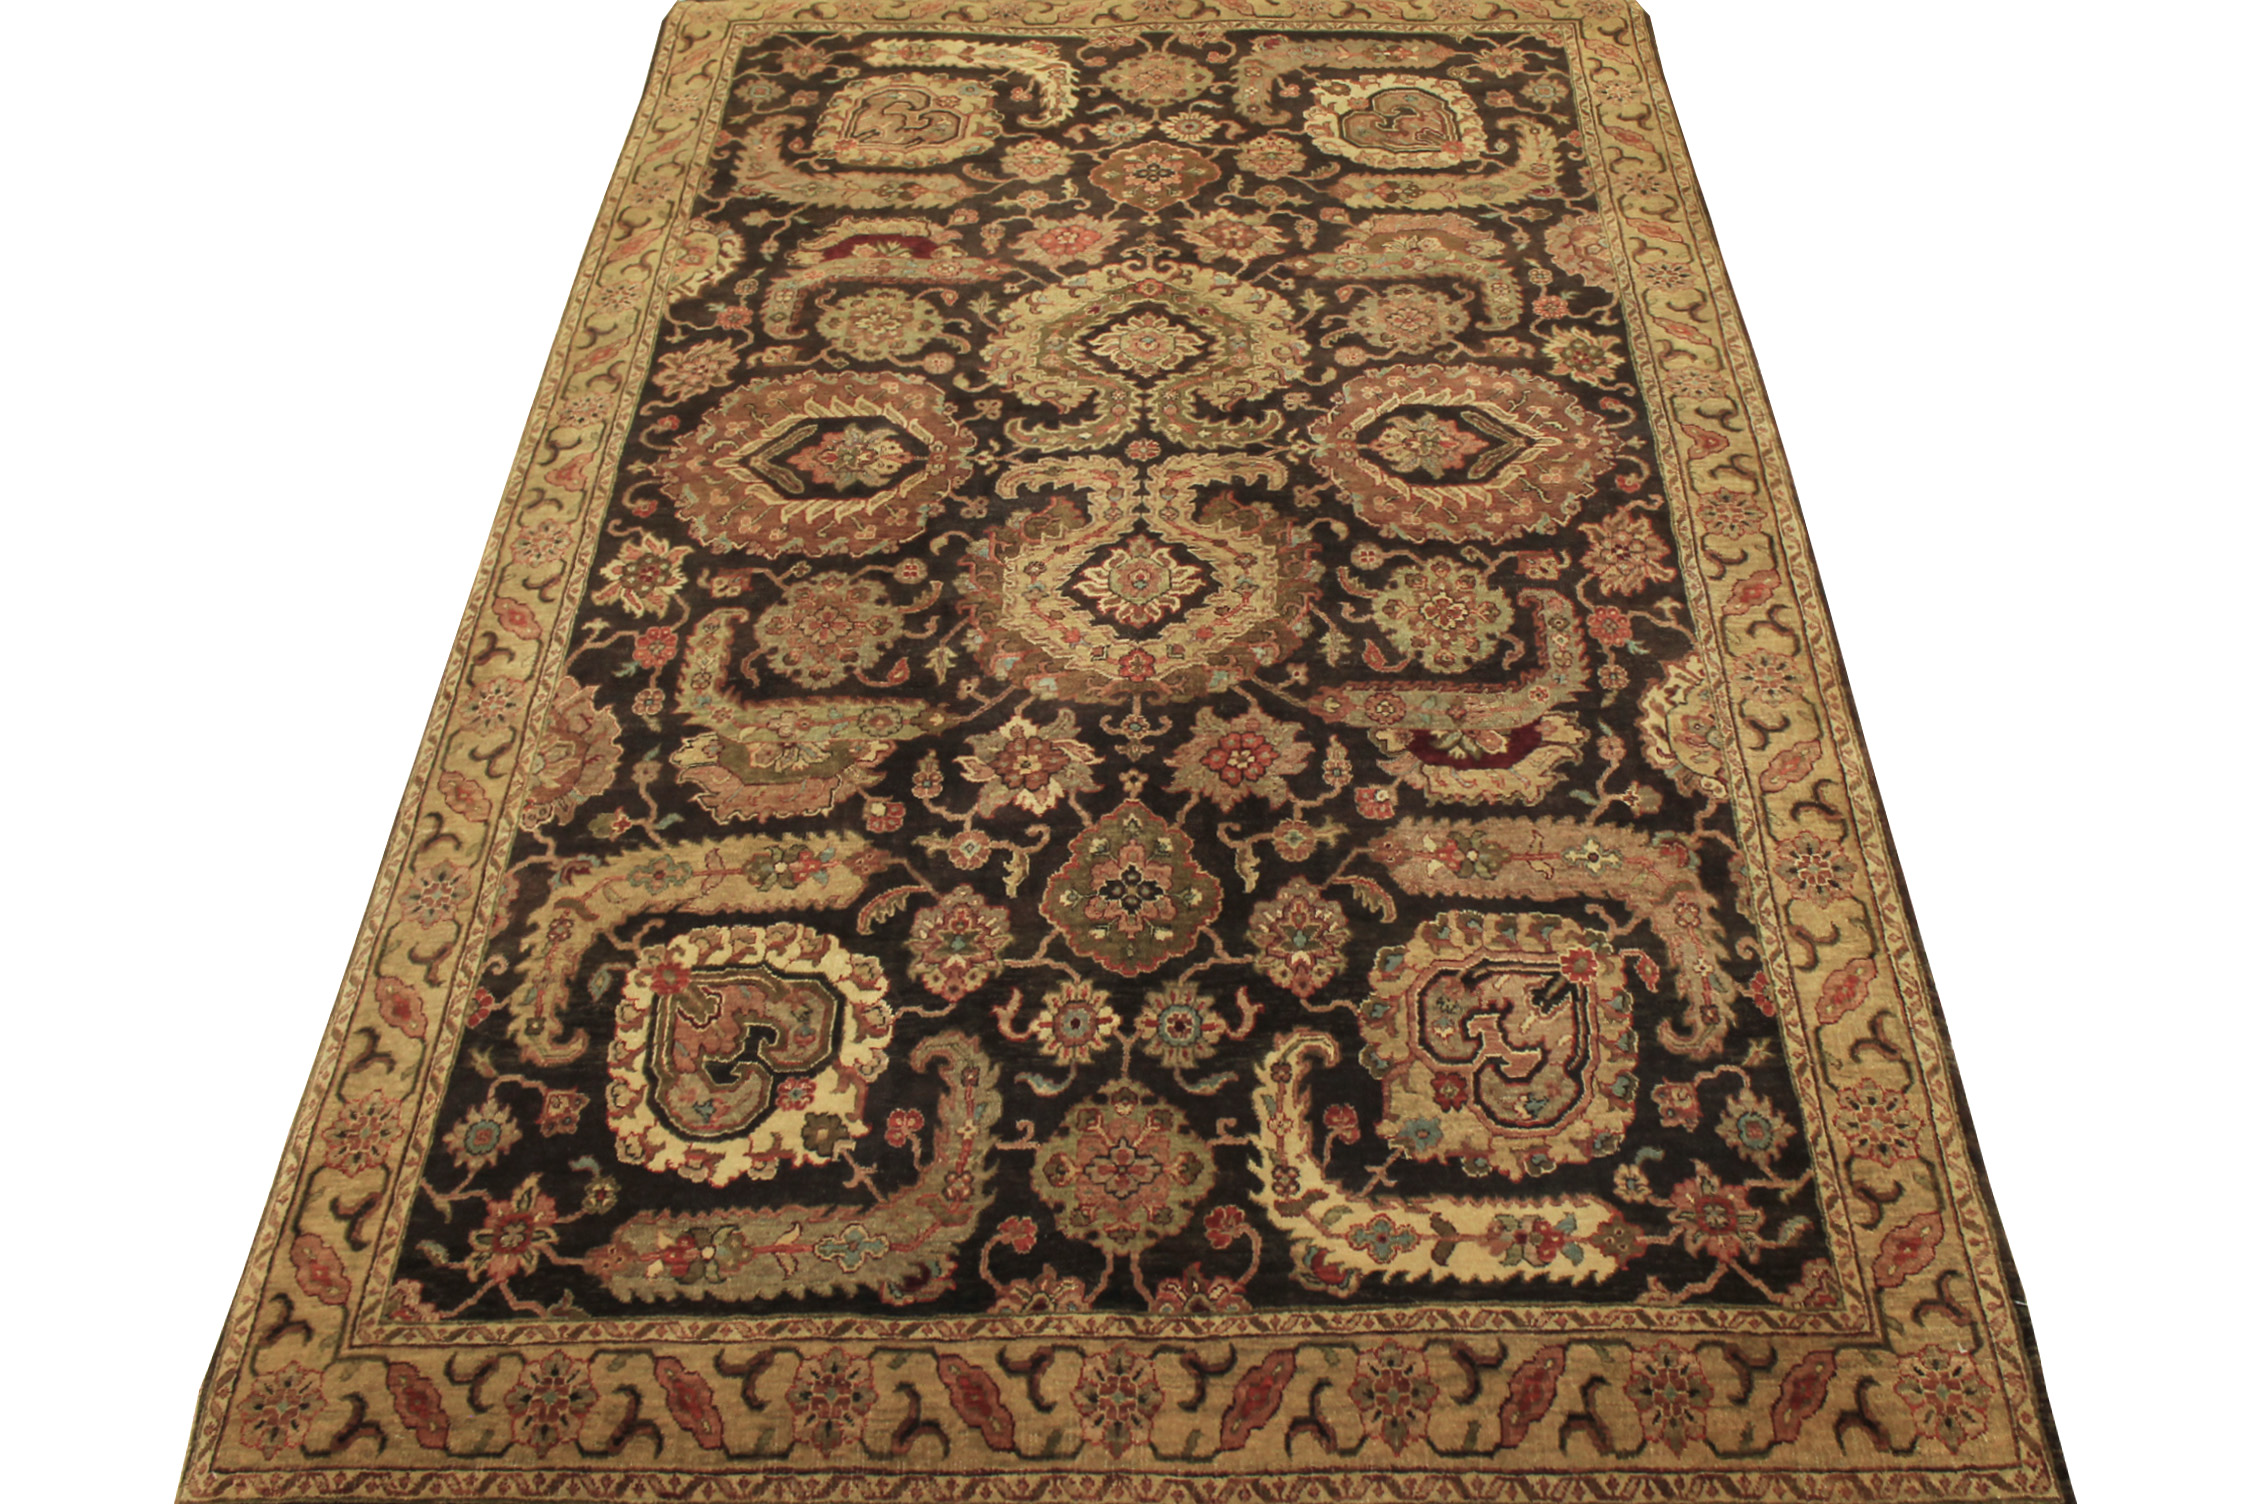 6x9 Antique Revival Hand Knotted Wool Area Rug - MR13425